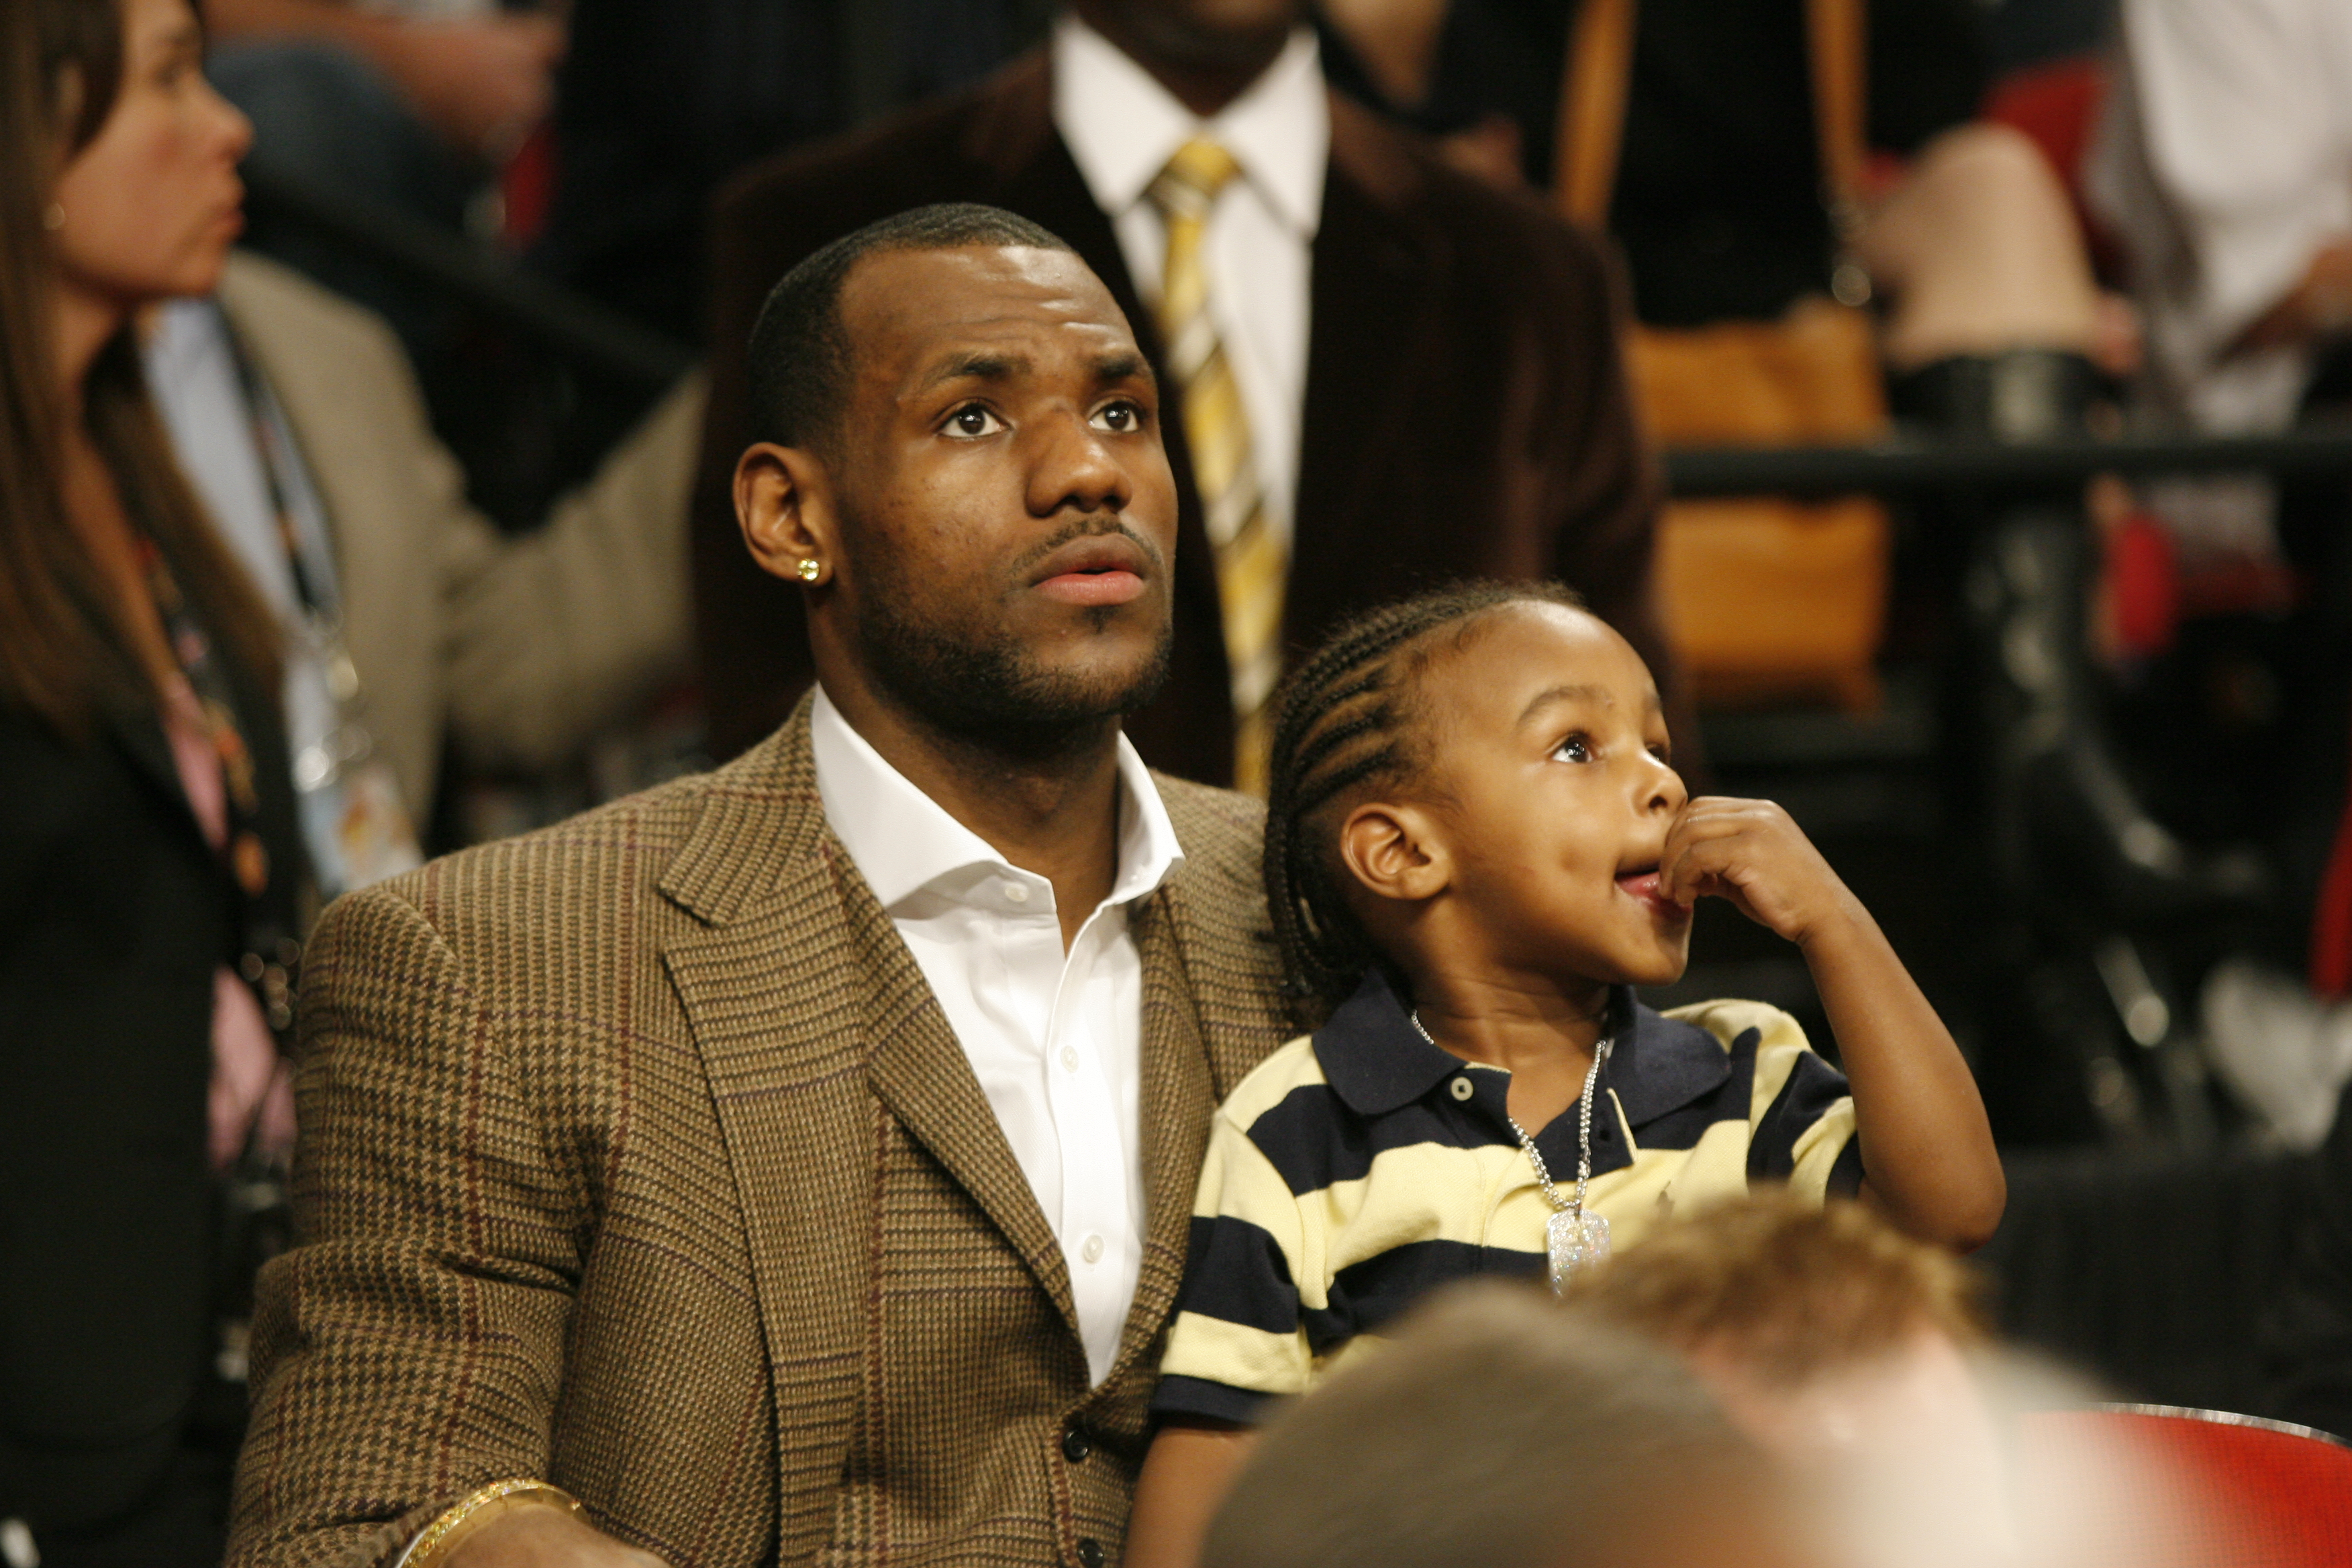 LeBron James and his young namesake son attends All-Star Saturday night as part 2007 NBA All-Star Weekend on February 17, 2007, at Thomas & Mack Center in Las Vegas, Nevada | Source: Jeff Bottari/NBAE via Getty Images